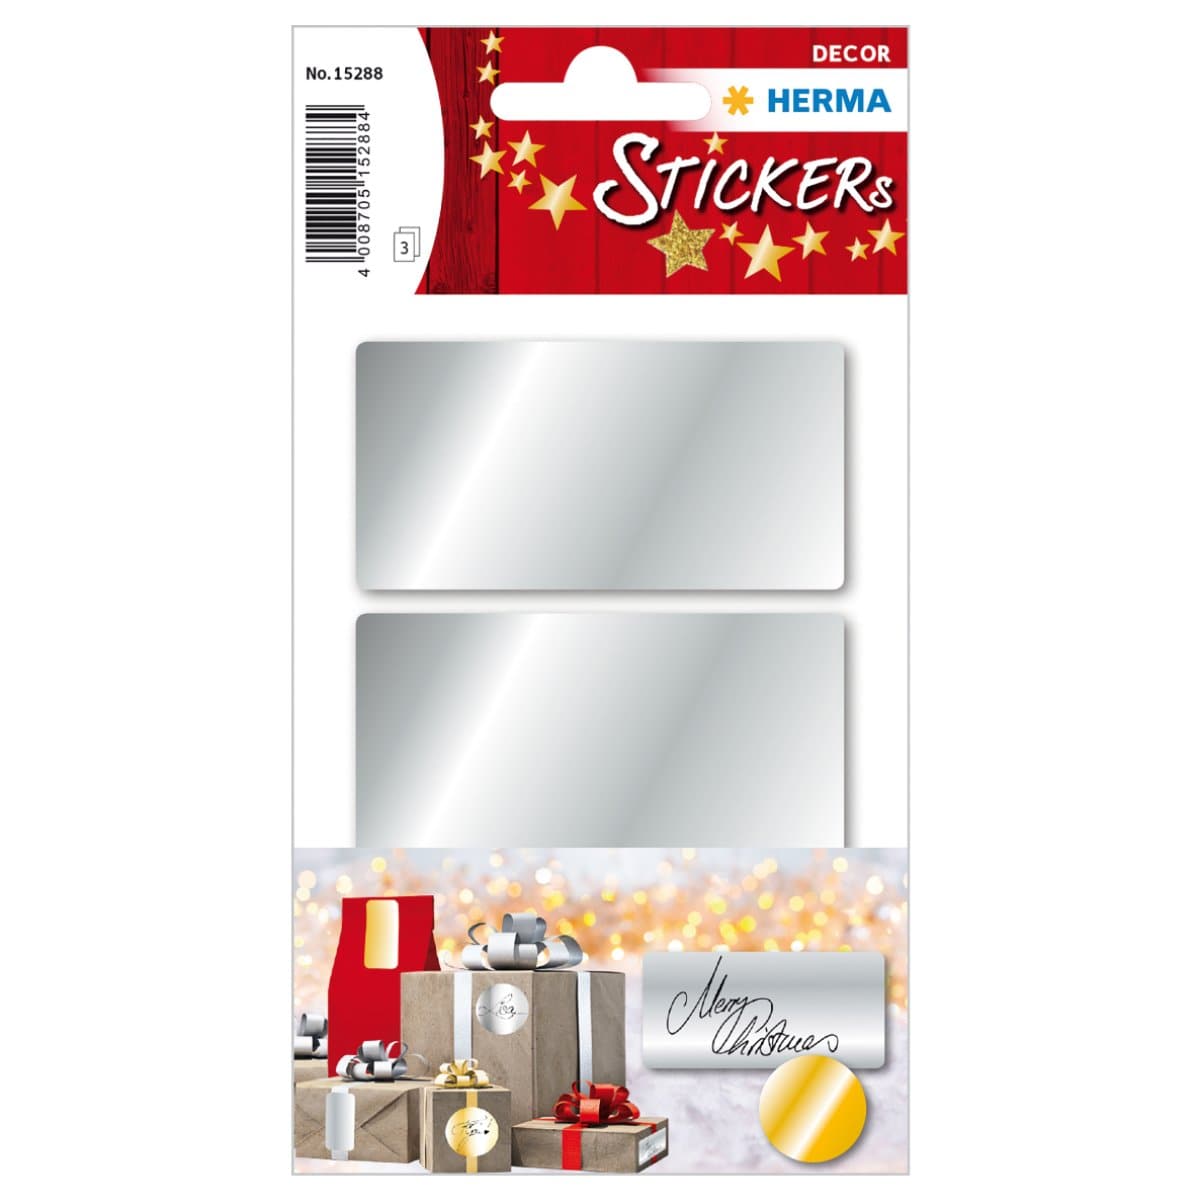 Herma Decor Stickers SILVER Labels, 34 x 67 mm, 9/pack, Silver